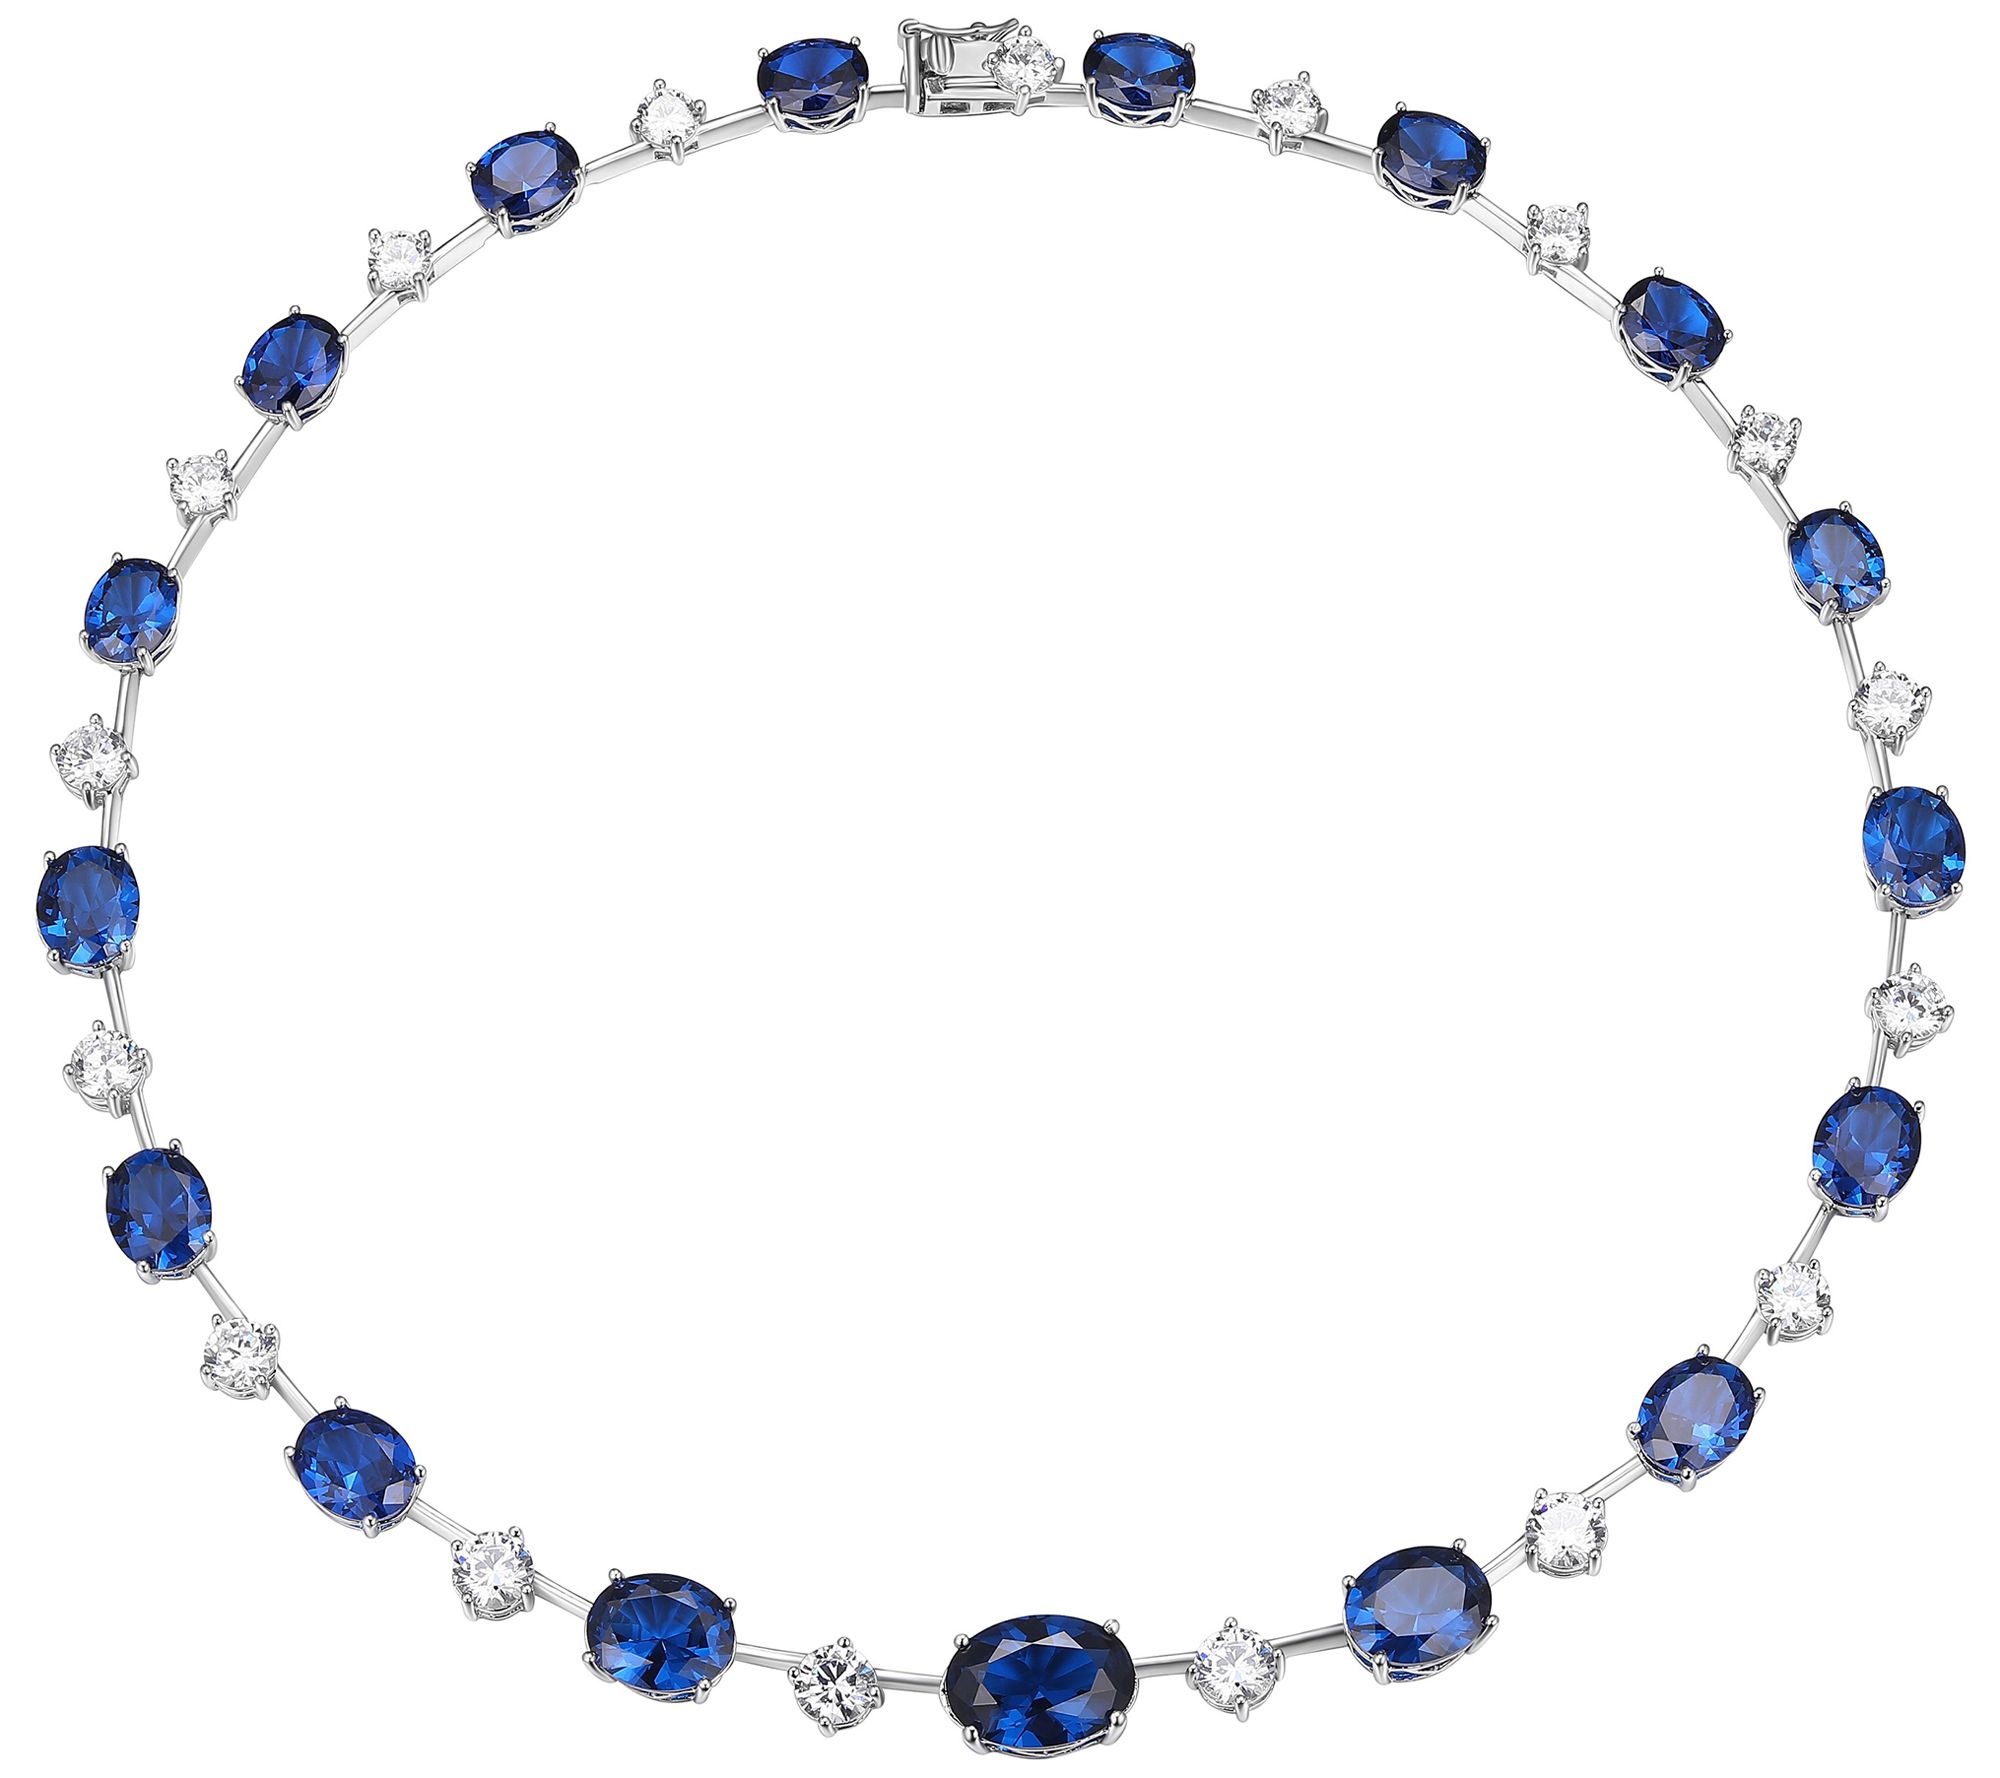 Diamonique & Simulated Blue Spinel Necklace, St erling Silver - QVC.com